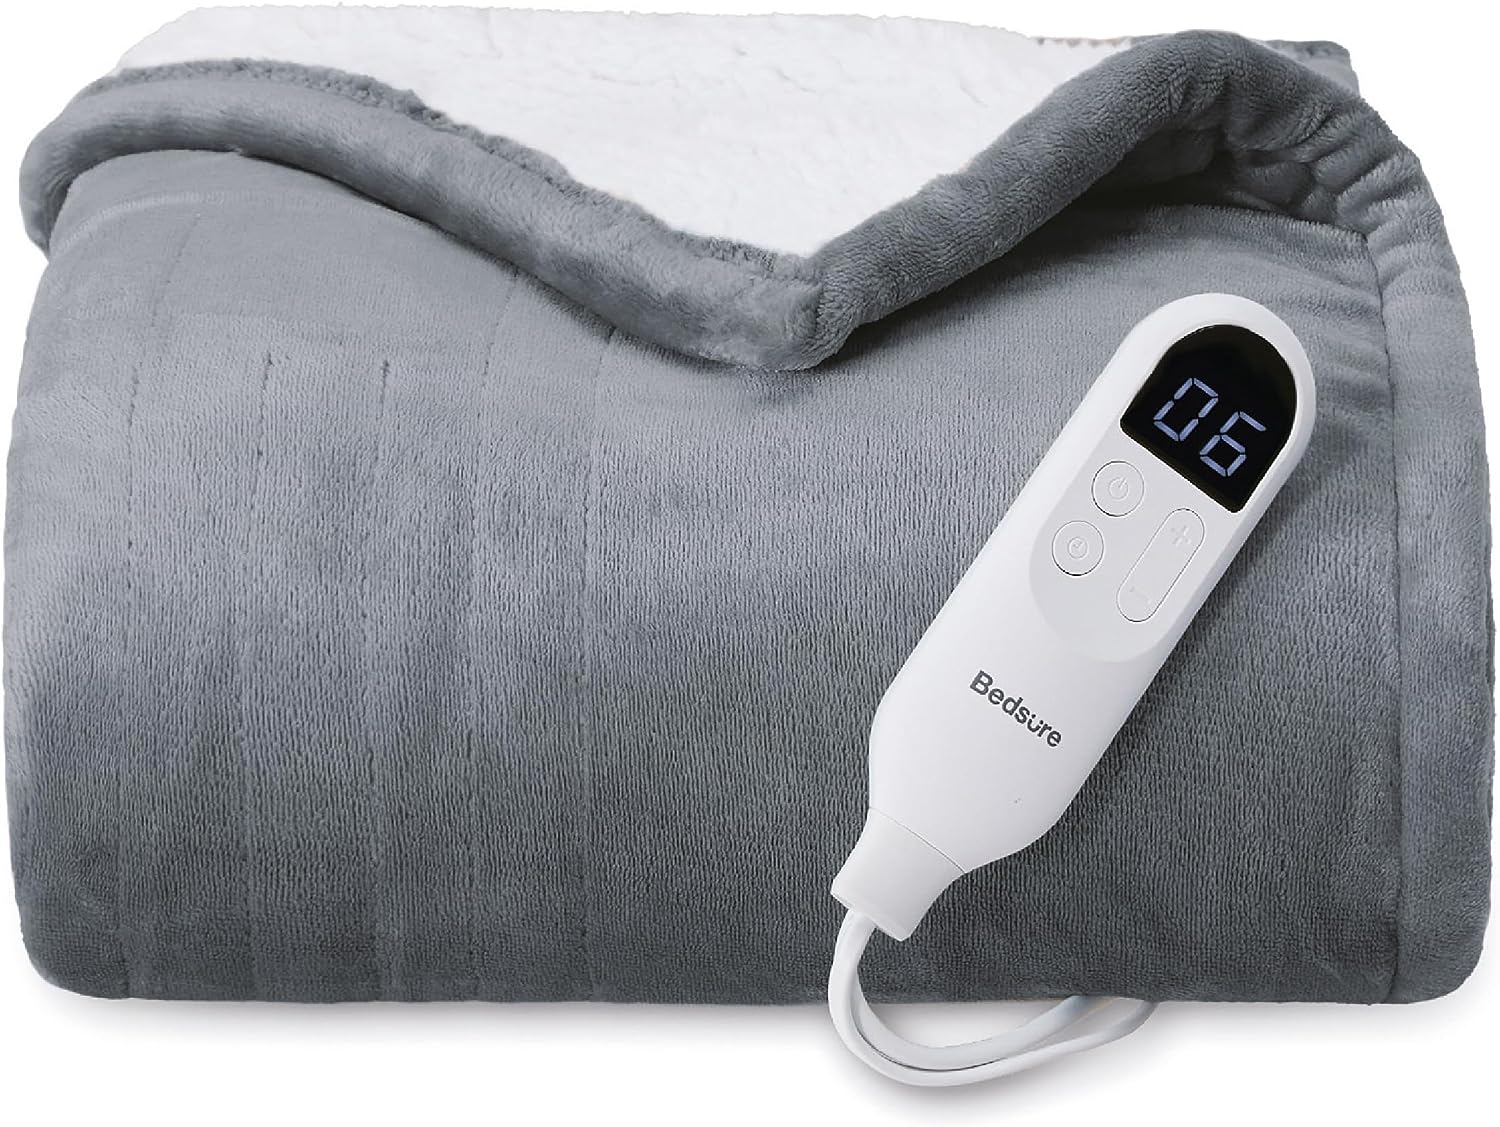 An image of a heated blanket with a remote